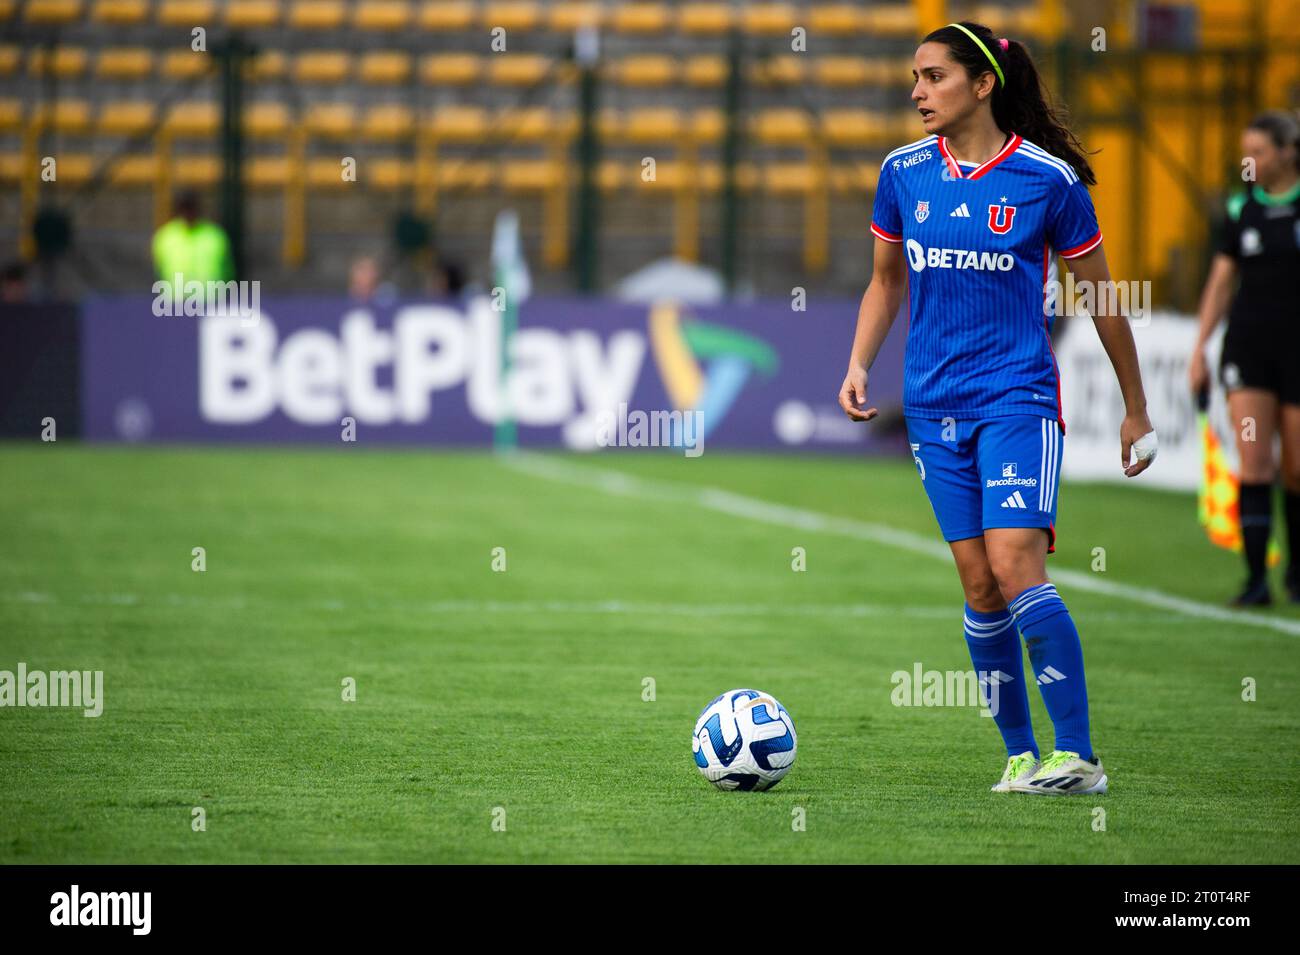 Bogota, Colombia. 08th Oct, 2023. Club Universidad de Chile's Daniela Zamora during the group phase match between Paraguay's Club Olimpia (1) and Club Universidad de Chile (2) during the Copa Libertadores Femenina, in Bogota, Colombia, October 8, 2023. Photo by: Chepa Beltran/Long Visual Press Credit: Long Visual Press/Alamy Live News Stock Photo